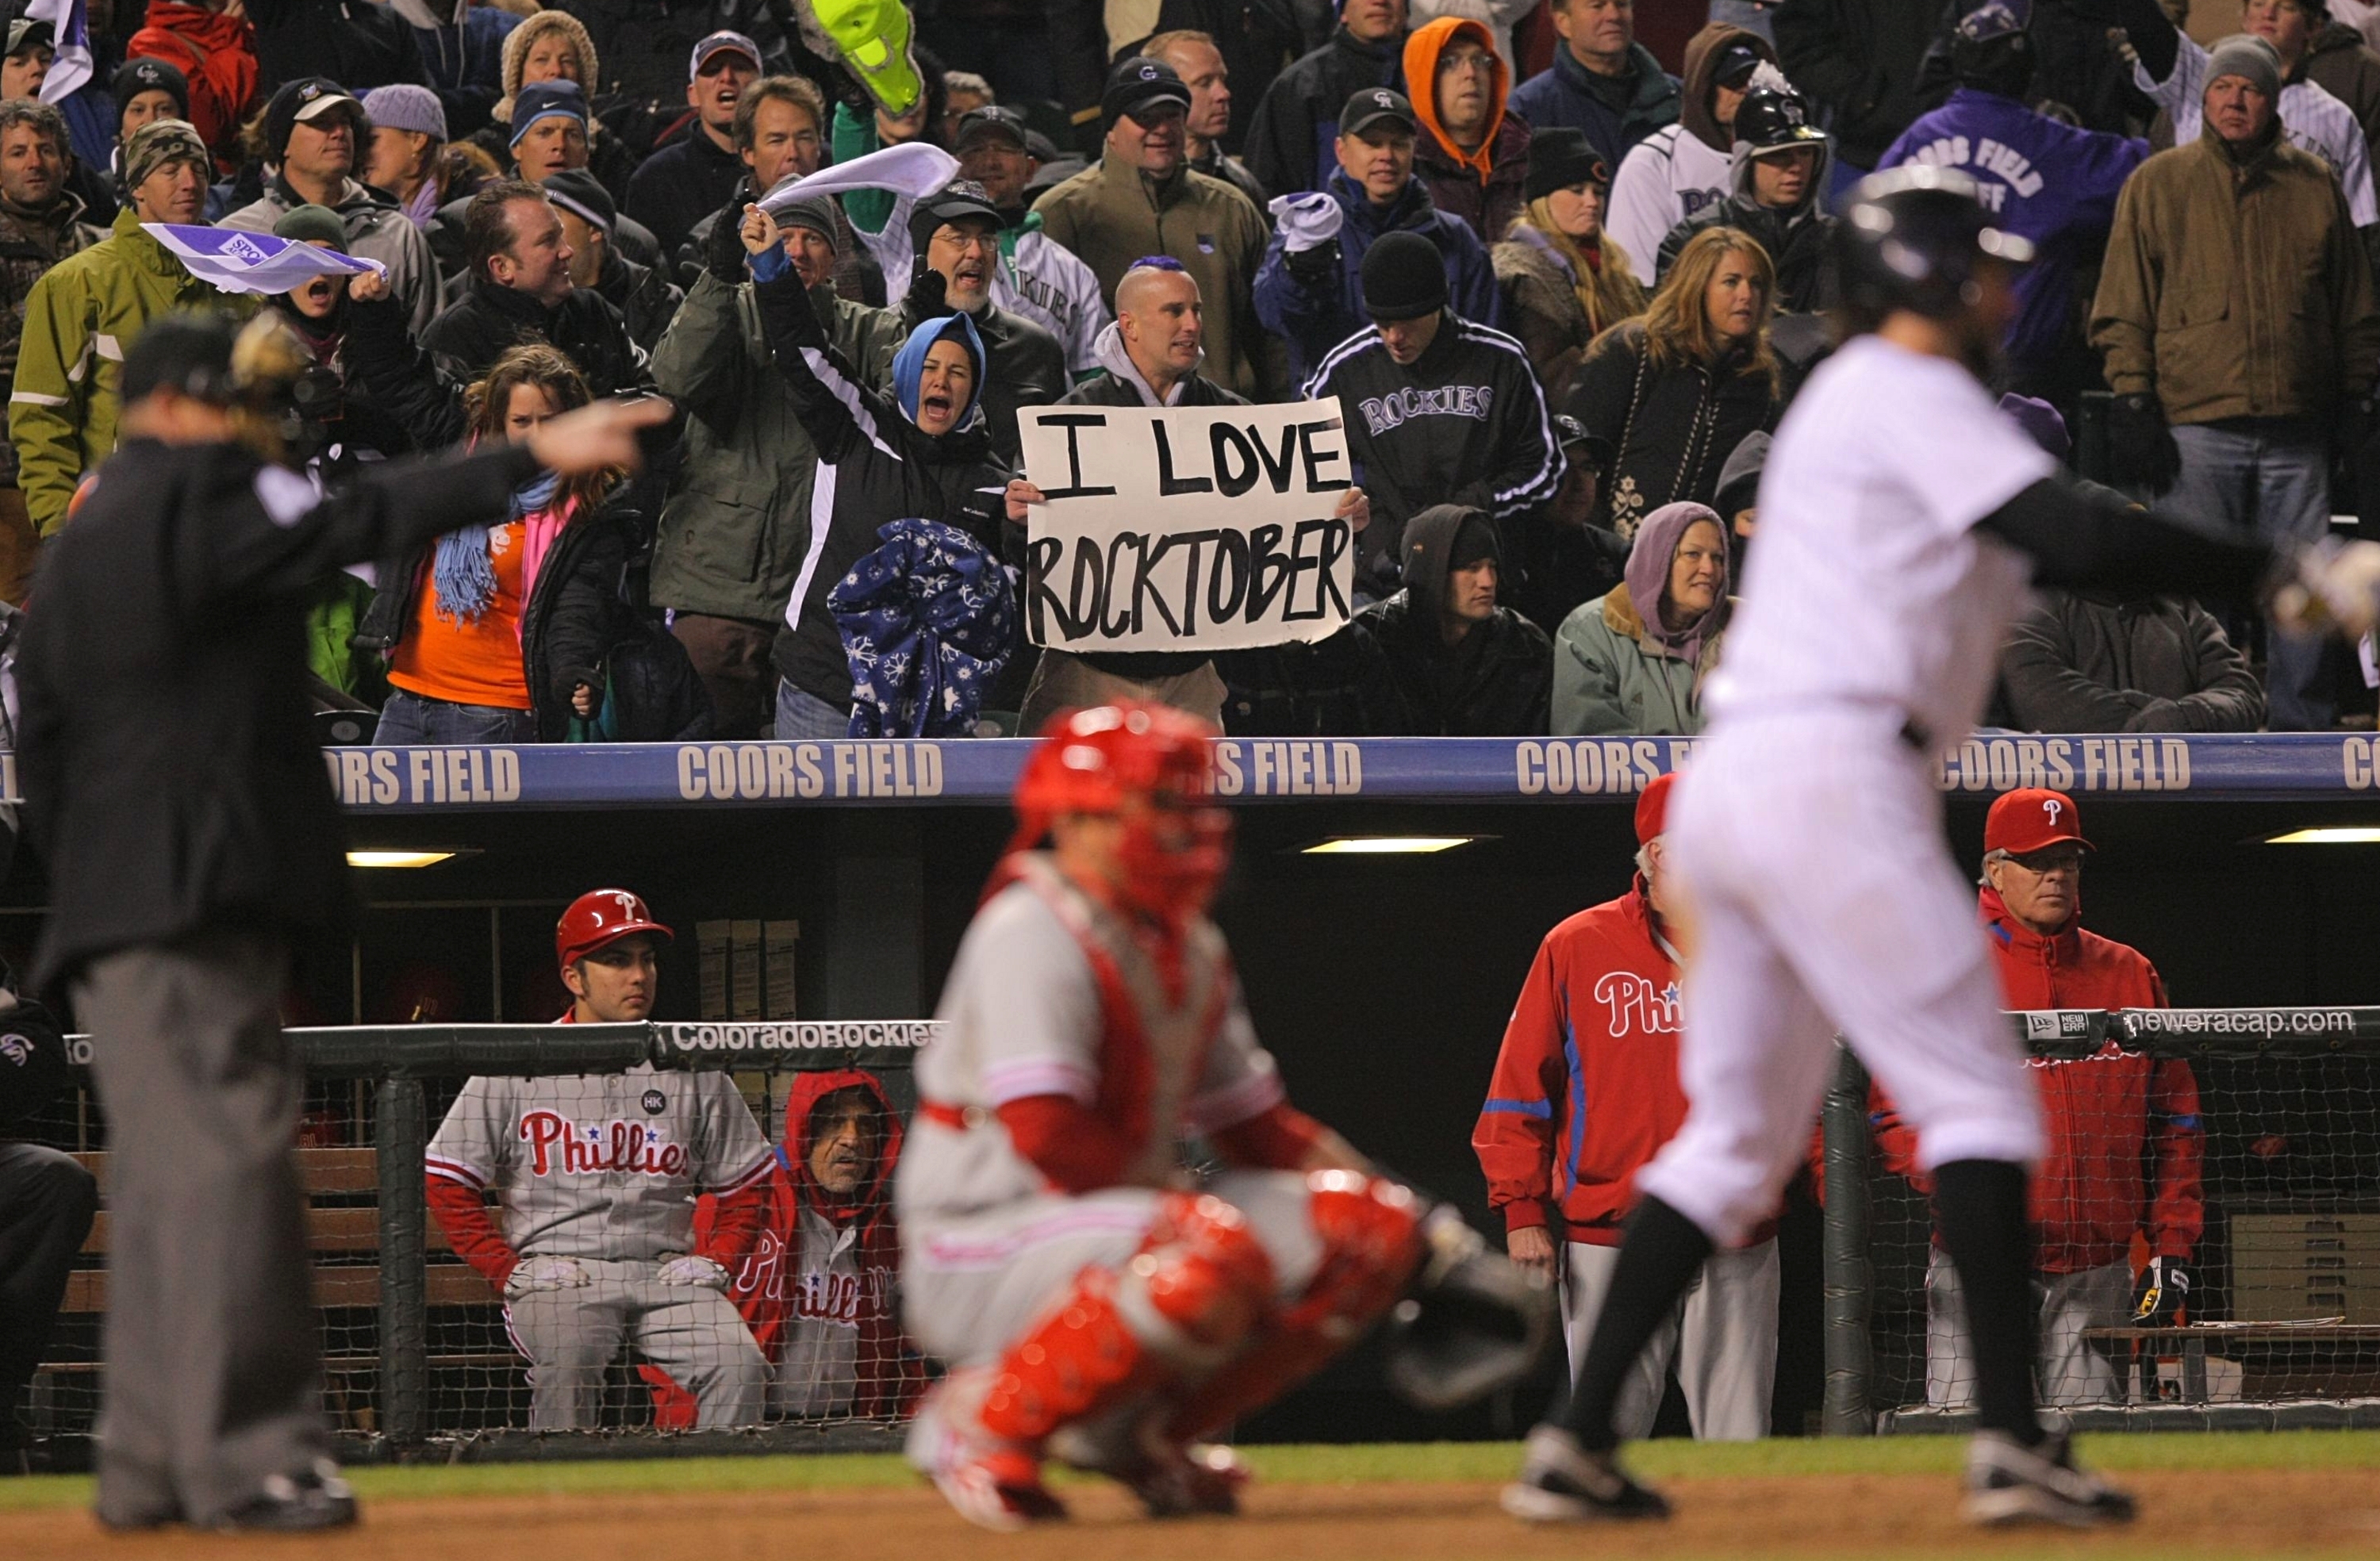 DENVER - OCTOBER 11:  Fans of the Colorado Rockies cheer for their team and hold up a sign which reads 'I Love Rocktober' against the Philadelphia Phillies in Game Three of the NLDS during the 2009 MLB Playoffs at Coors Field on October 11, 2009 in Denver